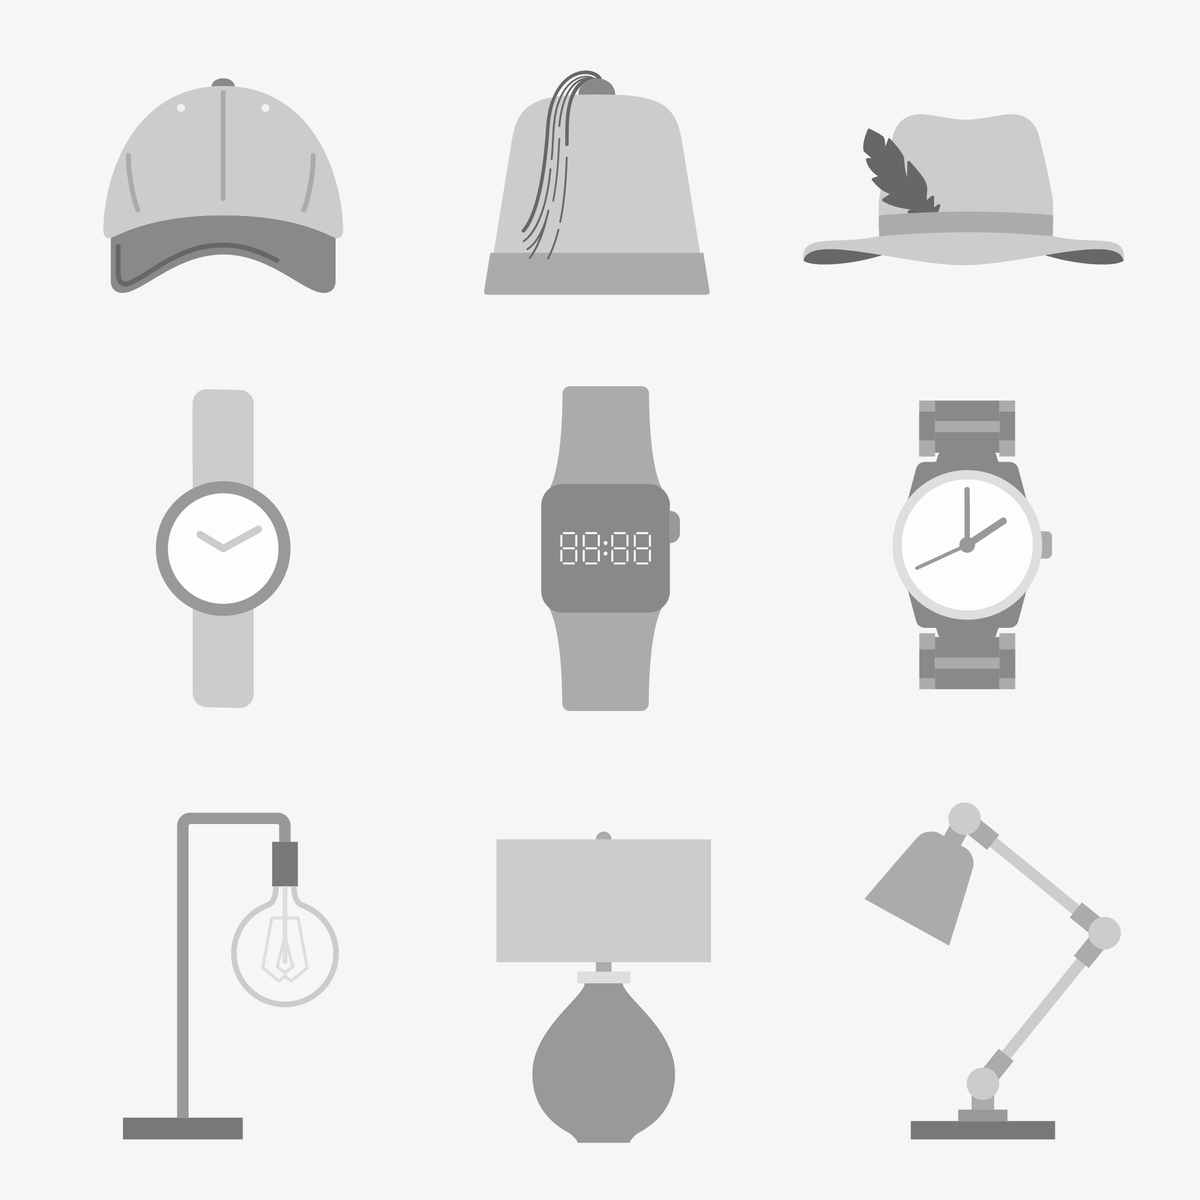 Greyscale vector images for watches, lamps, and hats.